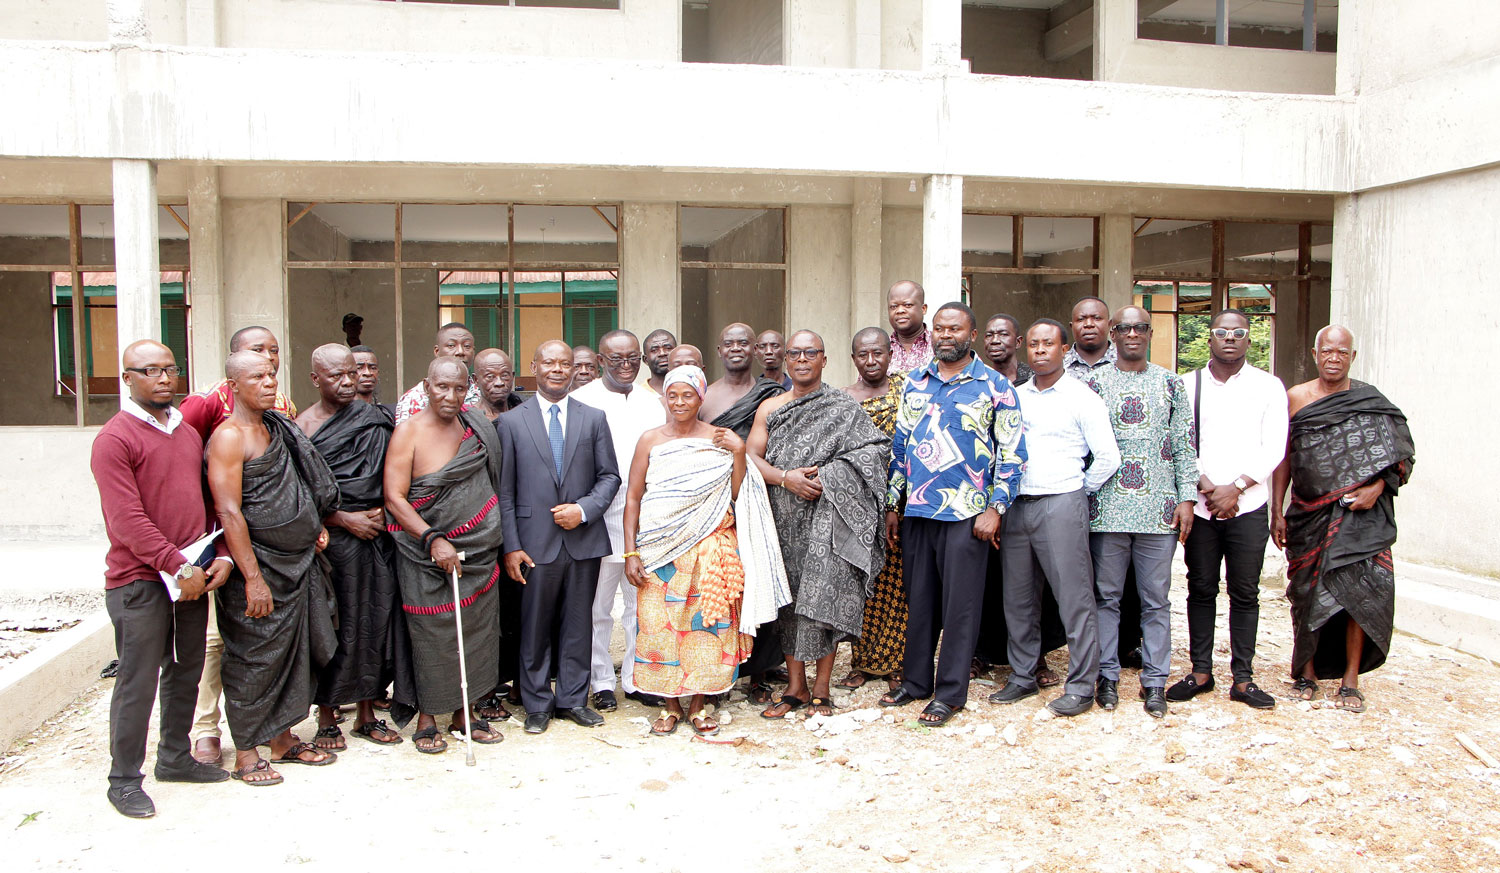 KsTU Develops a Satellite Campus in Collaboration with the Chiefs and People of Juansa.